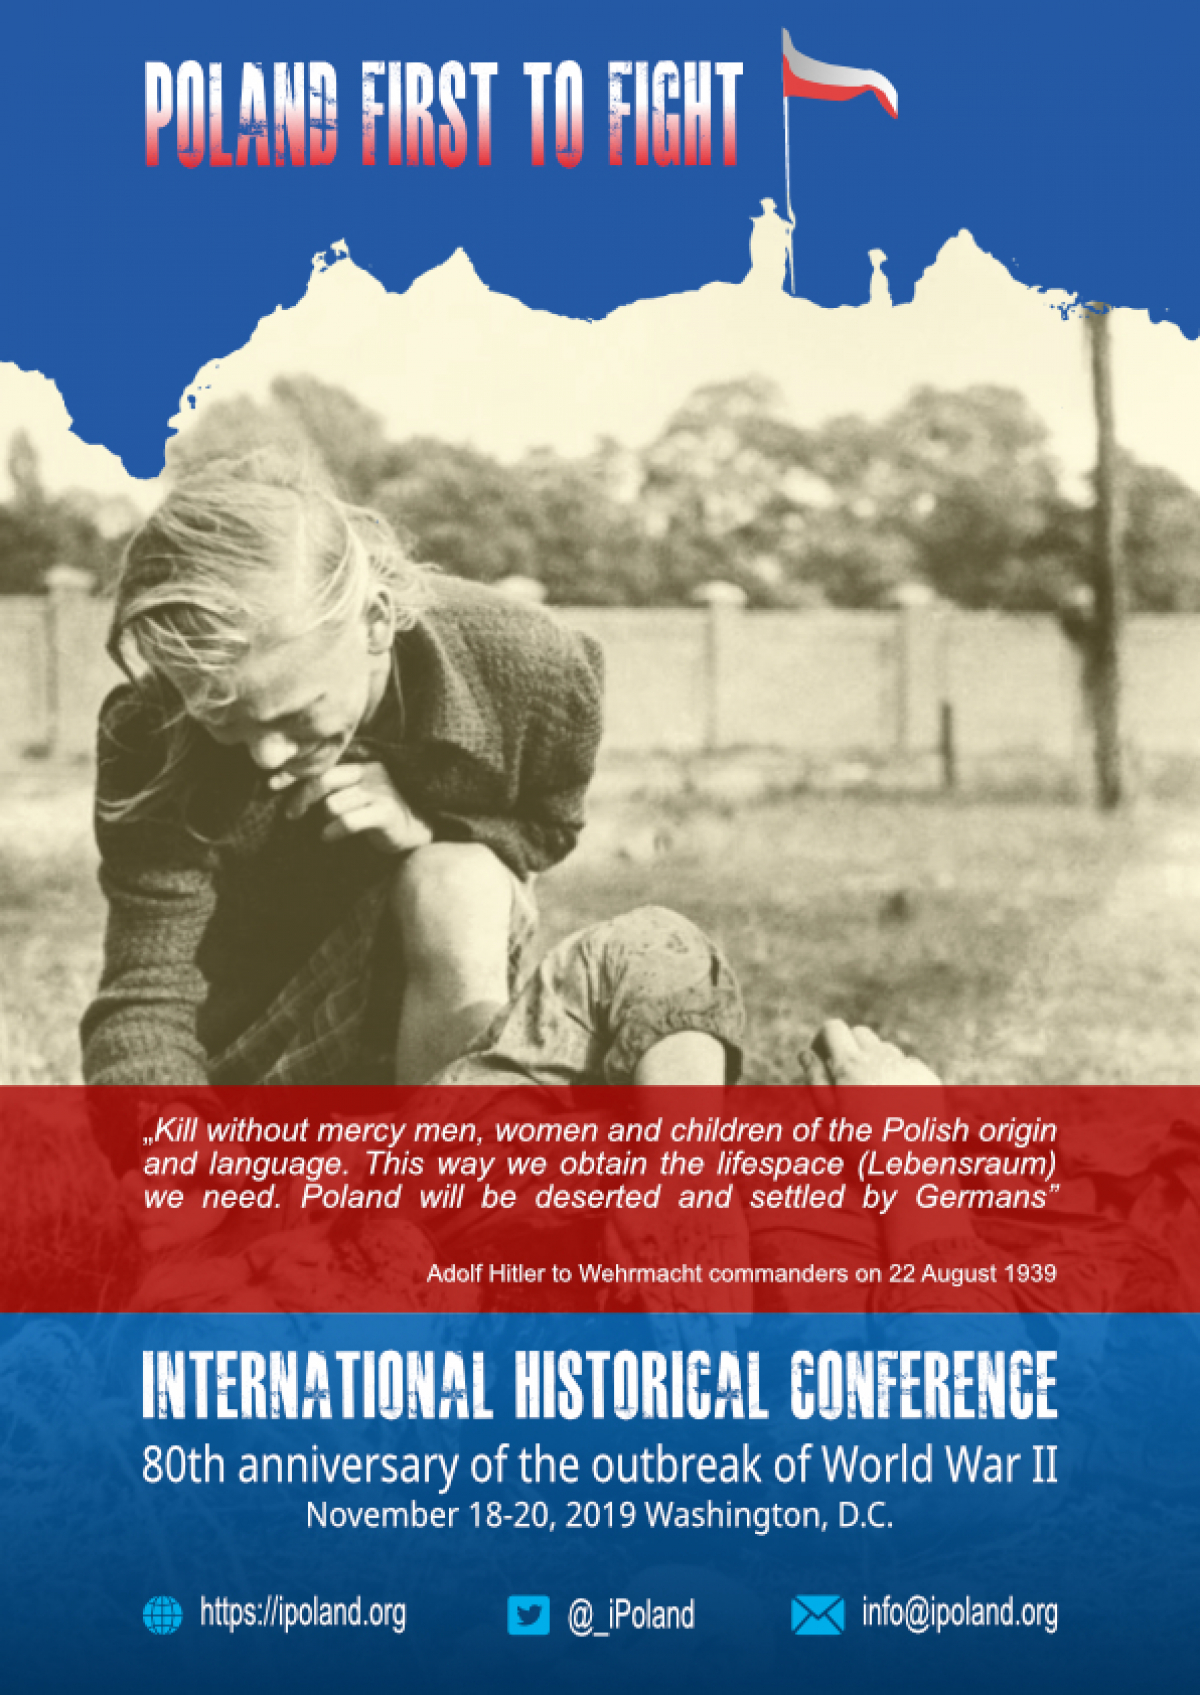 mBooked.com, International Historical Conference - Poland First to Fight!, Washington, D.C., iPoland